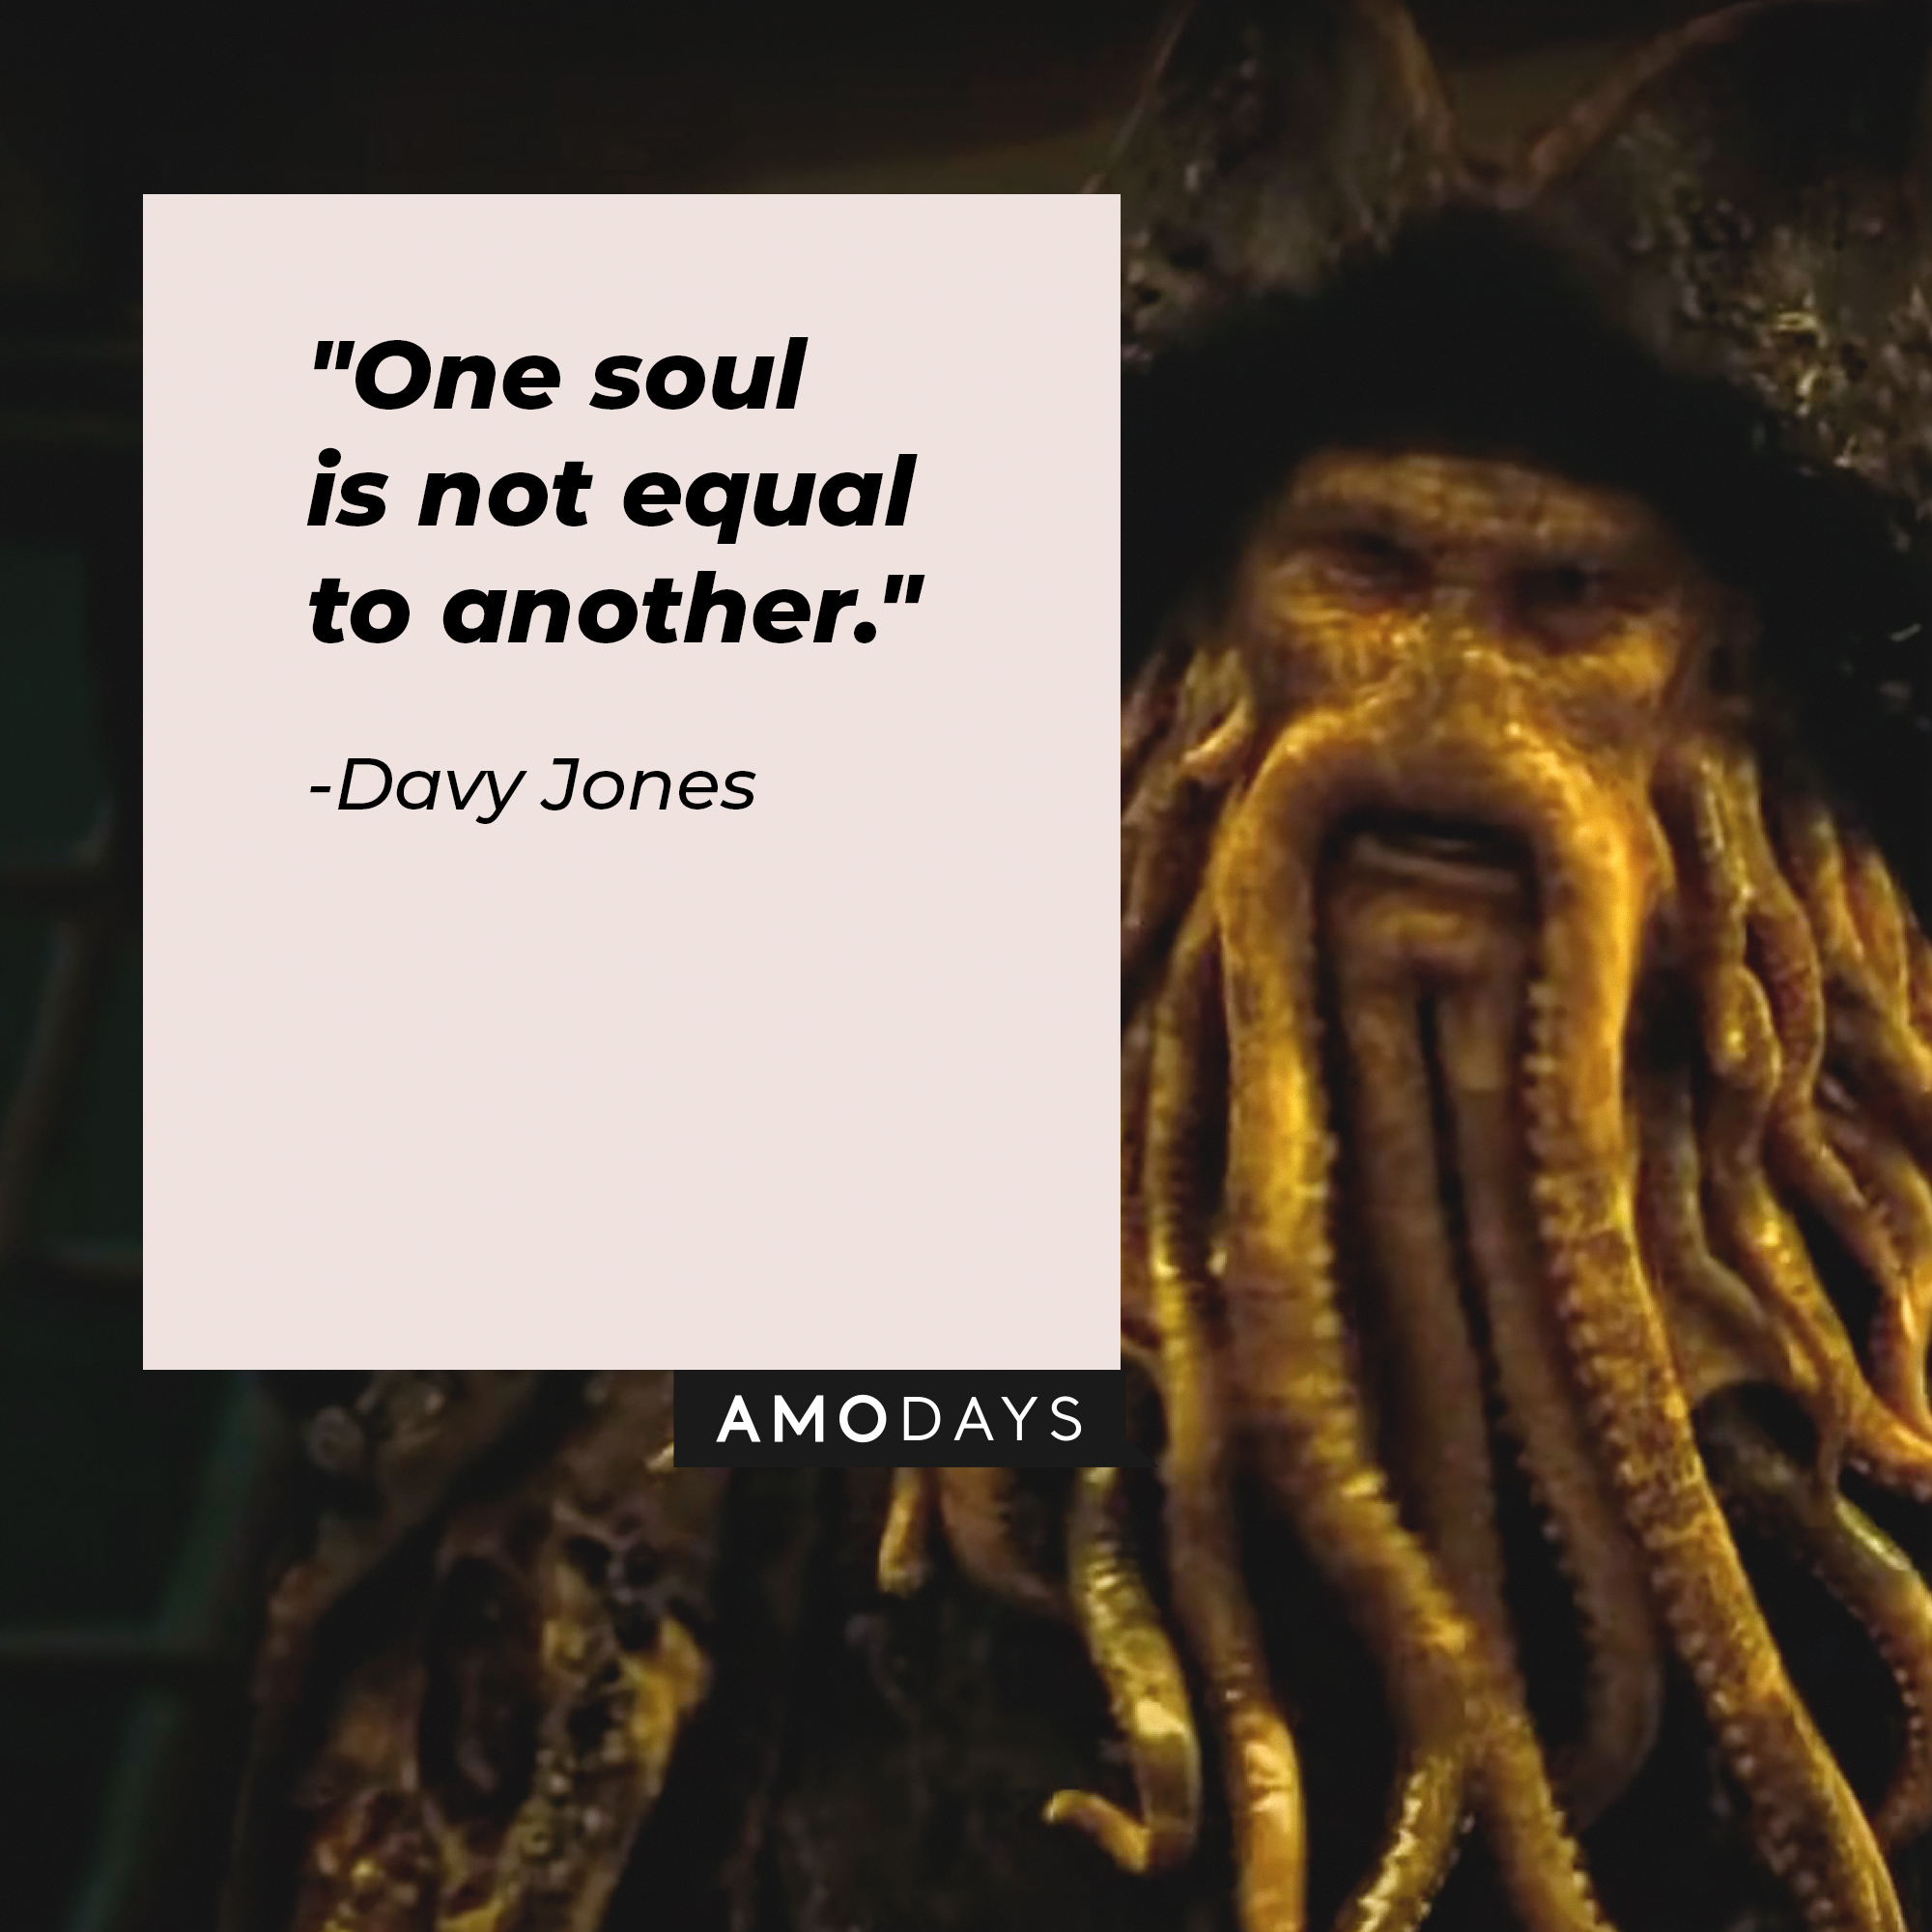 Davy Jones's quotes: "One soul is not equal to another." | Image: AmoDays